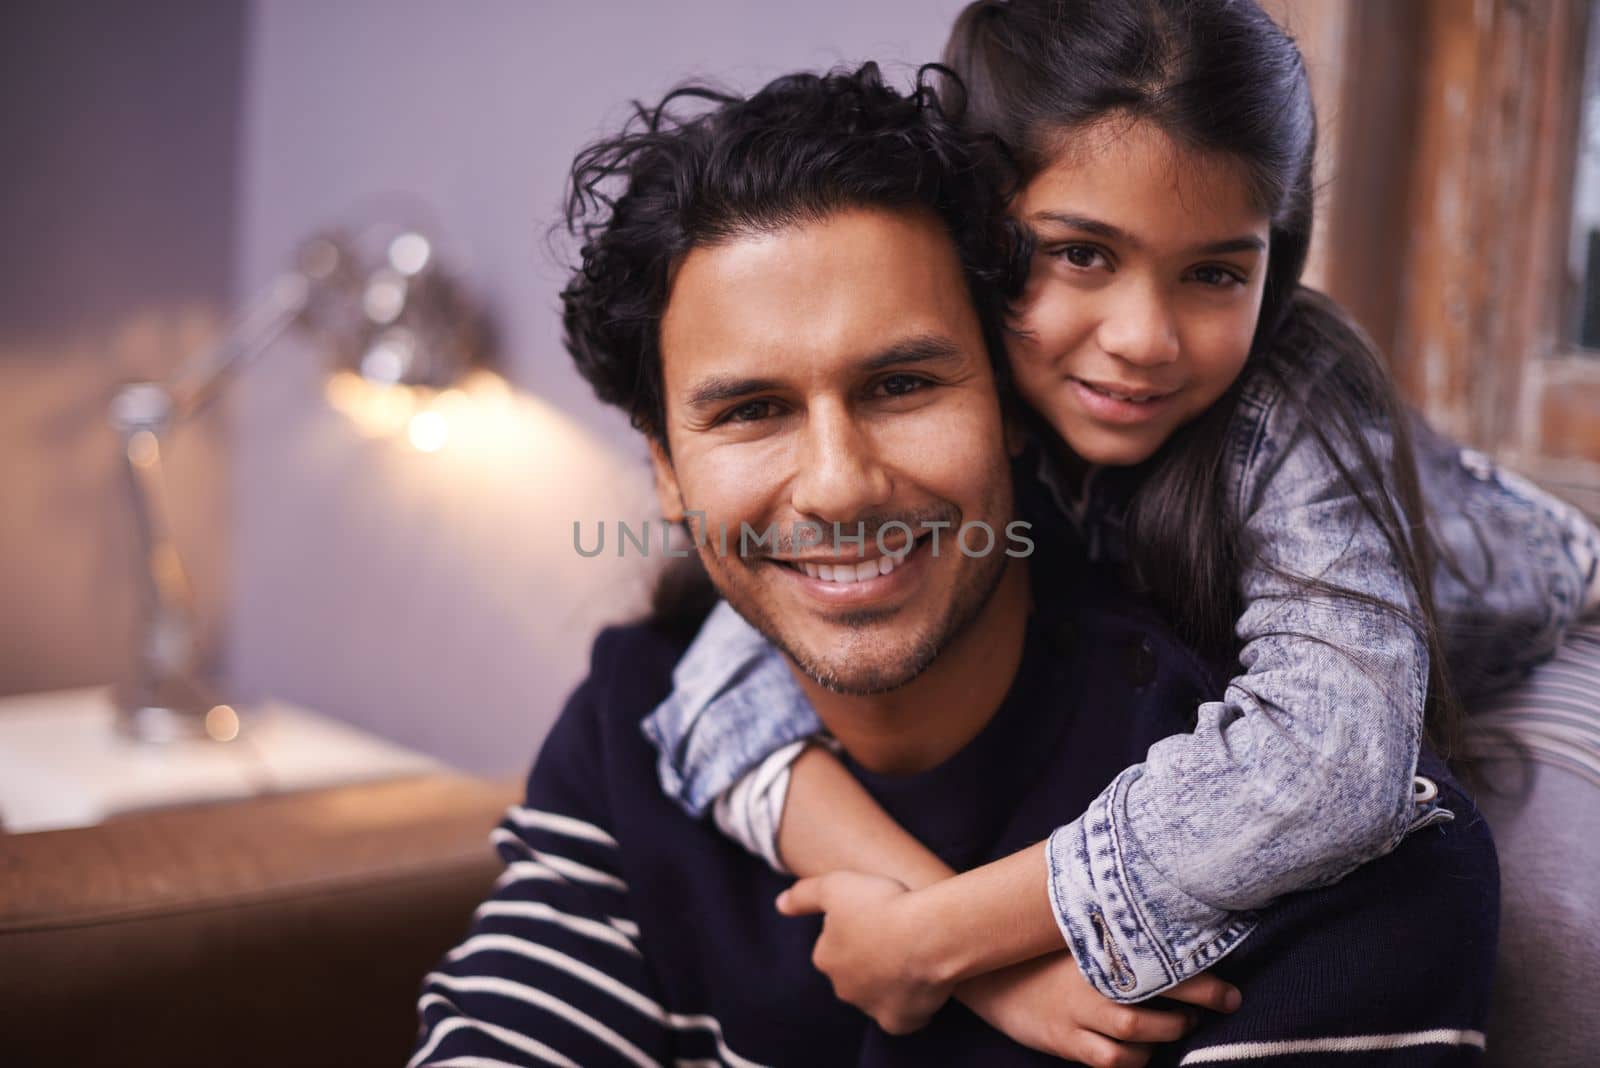 Every moment with her is precious. Portrait of a loving father and daughter at home